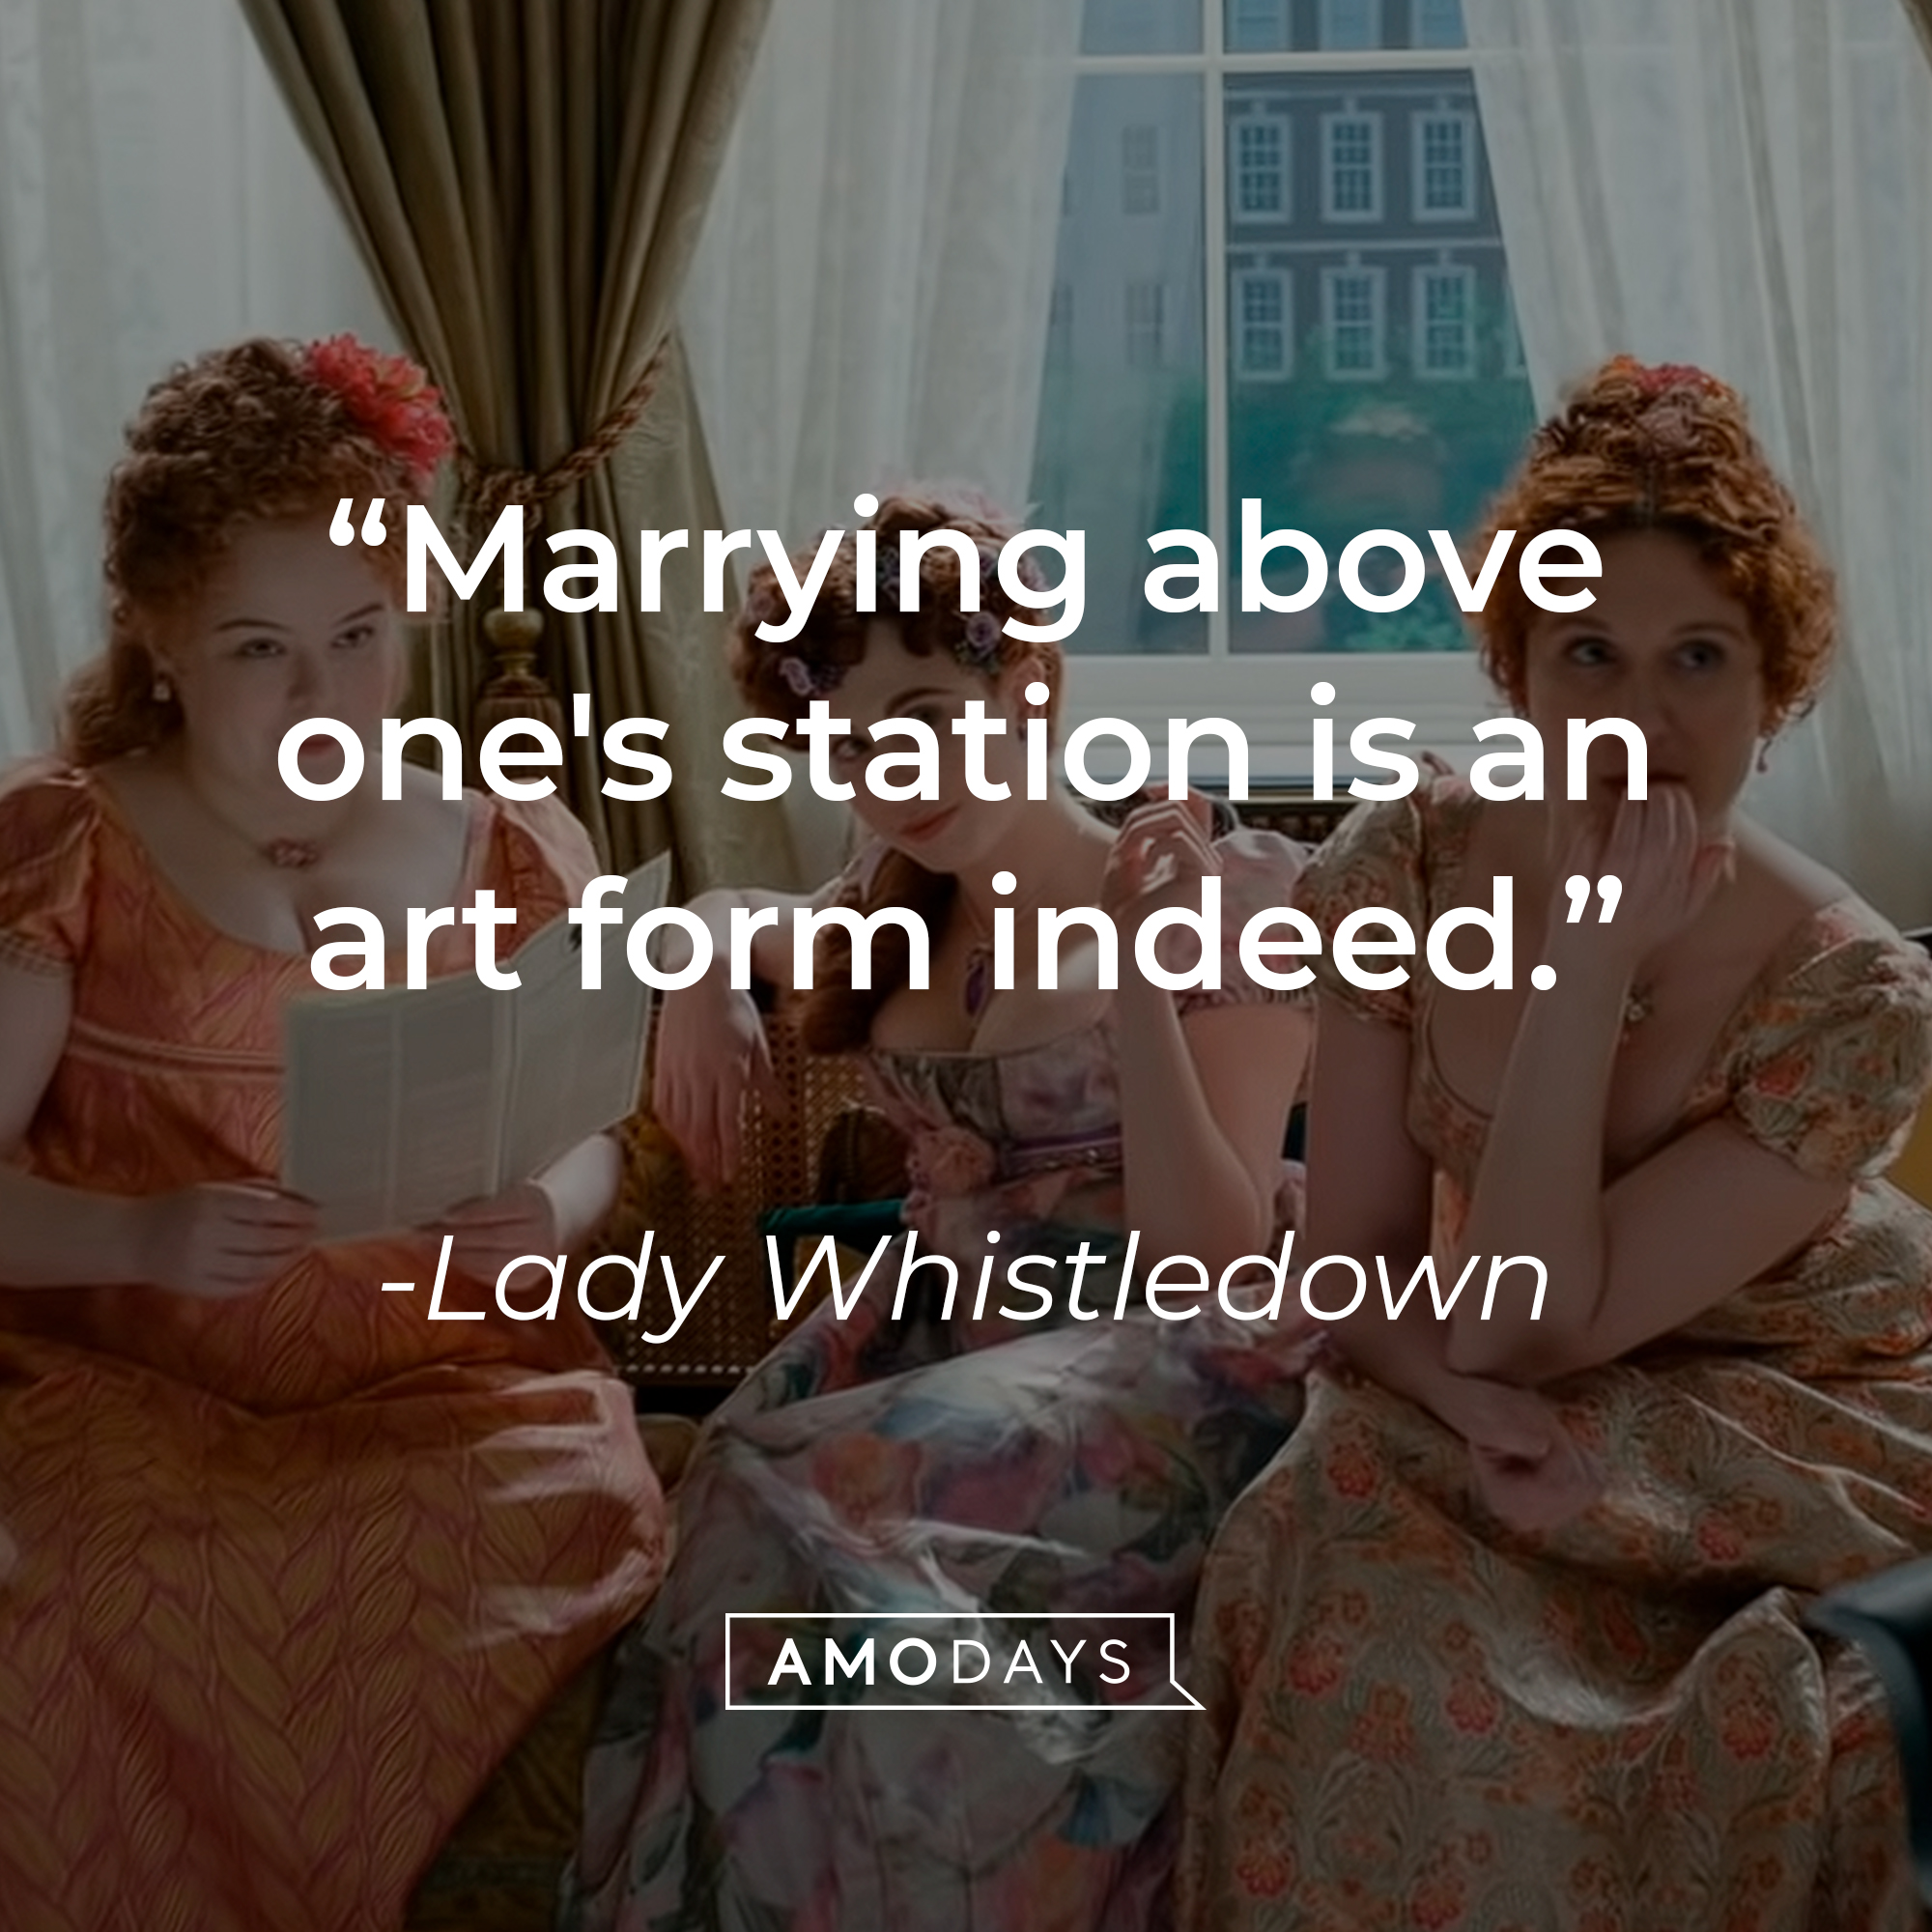 Lady Whistledown's quote: "Marrying above one's station is an art form indeed." | Source: Youtube.com/Netflix